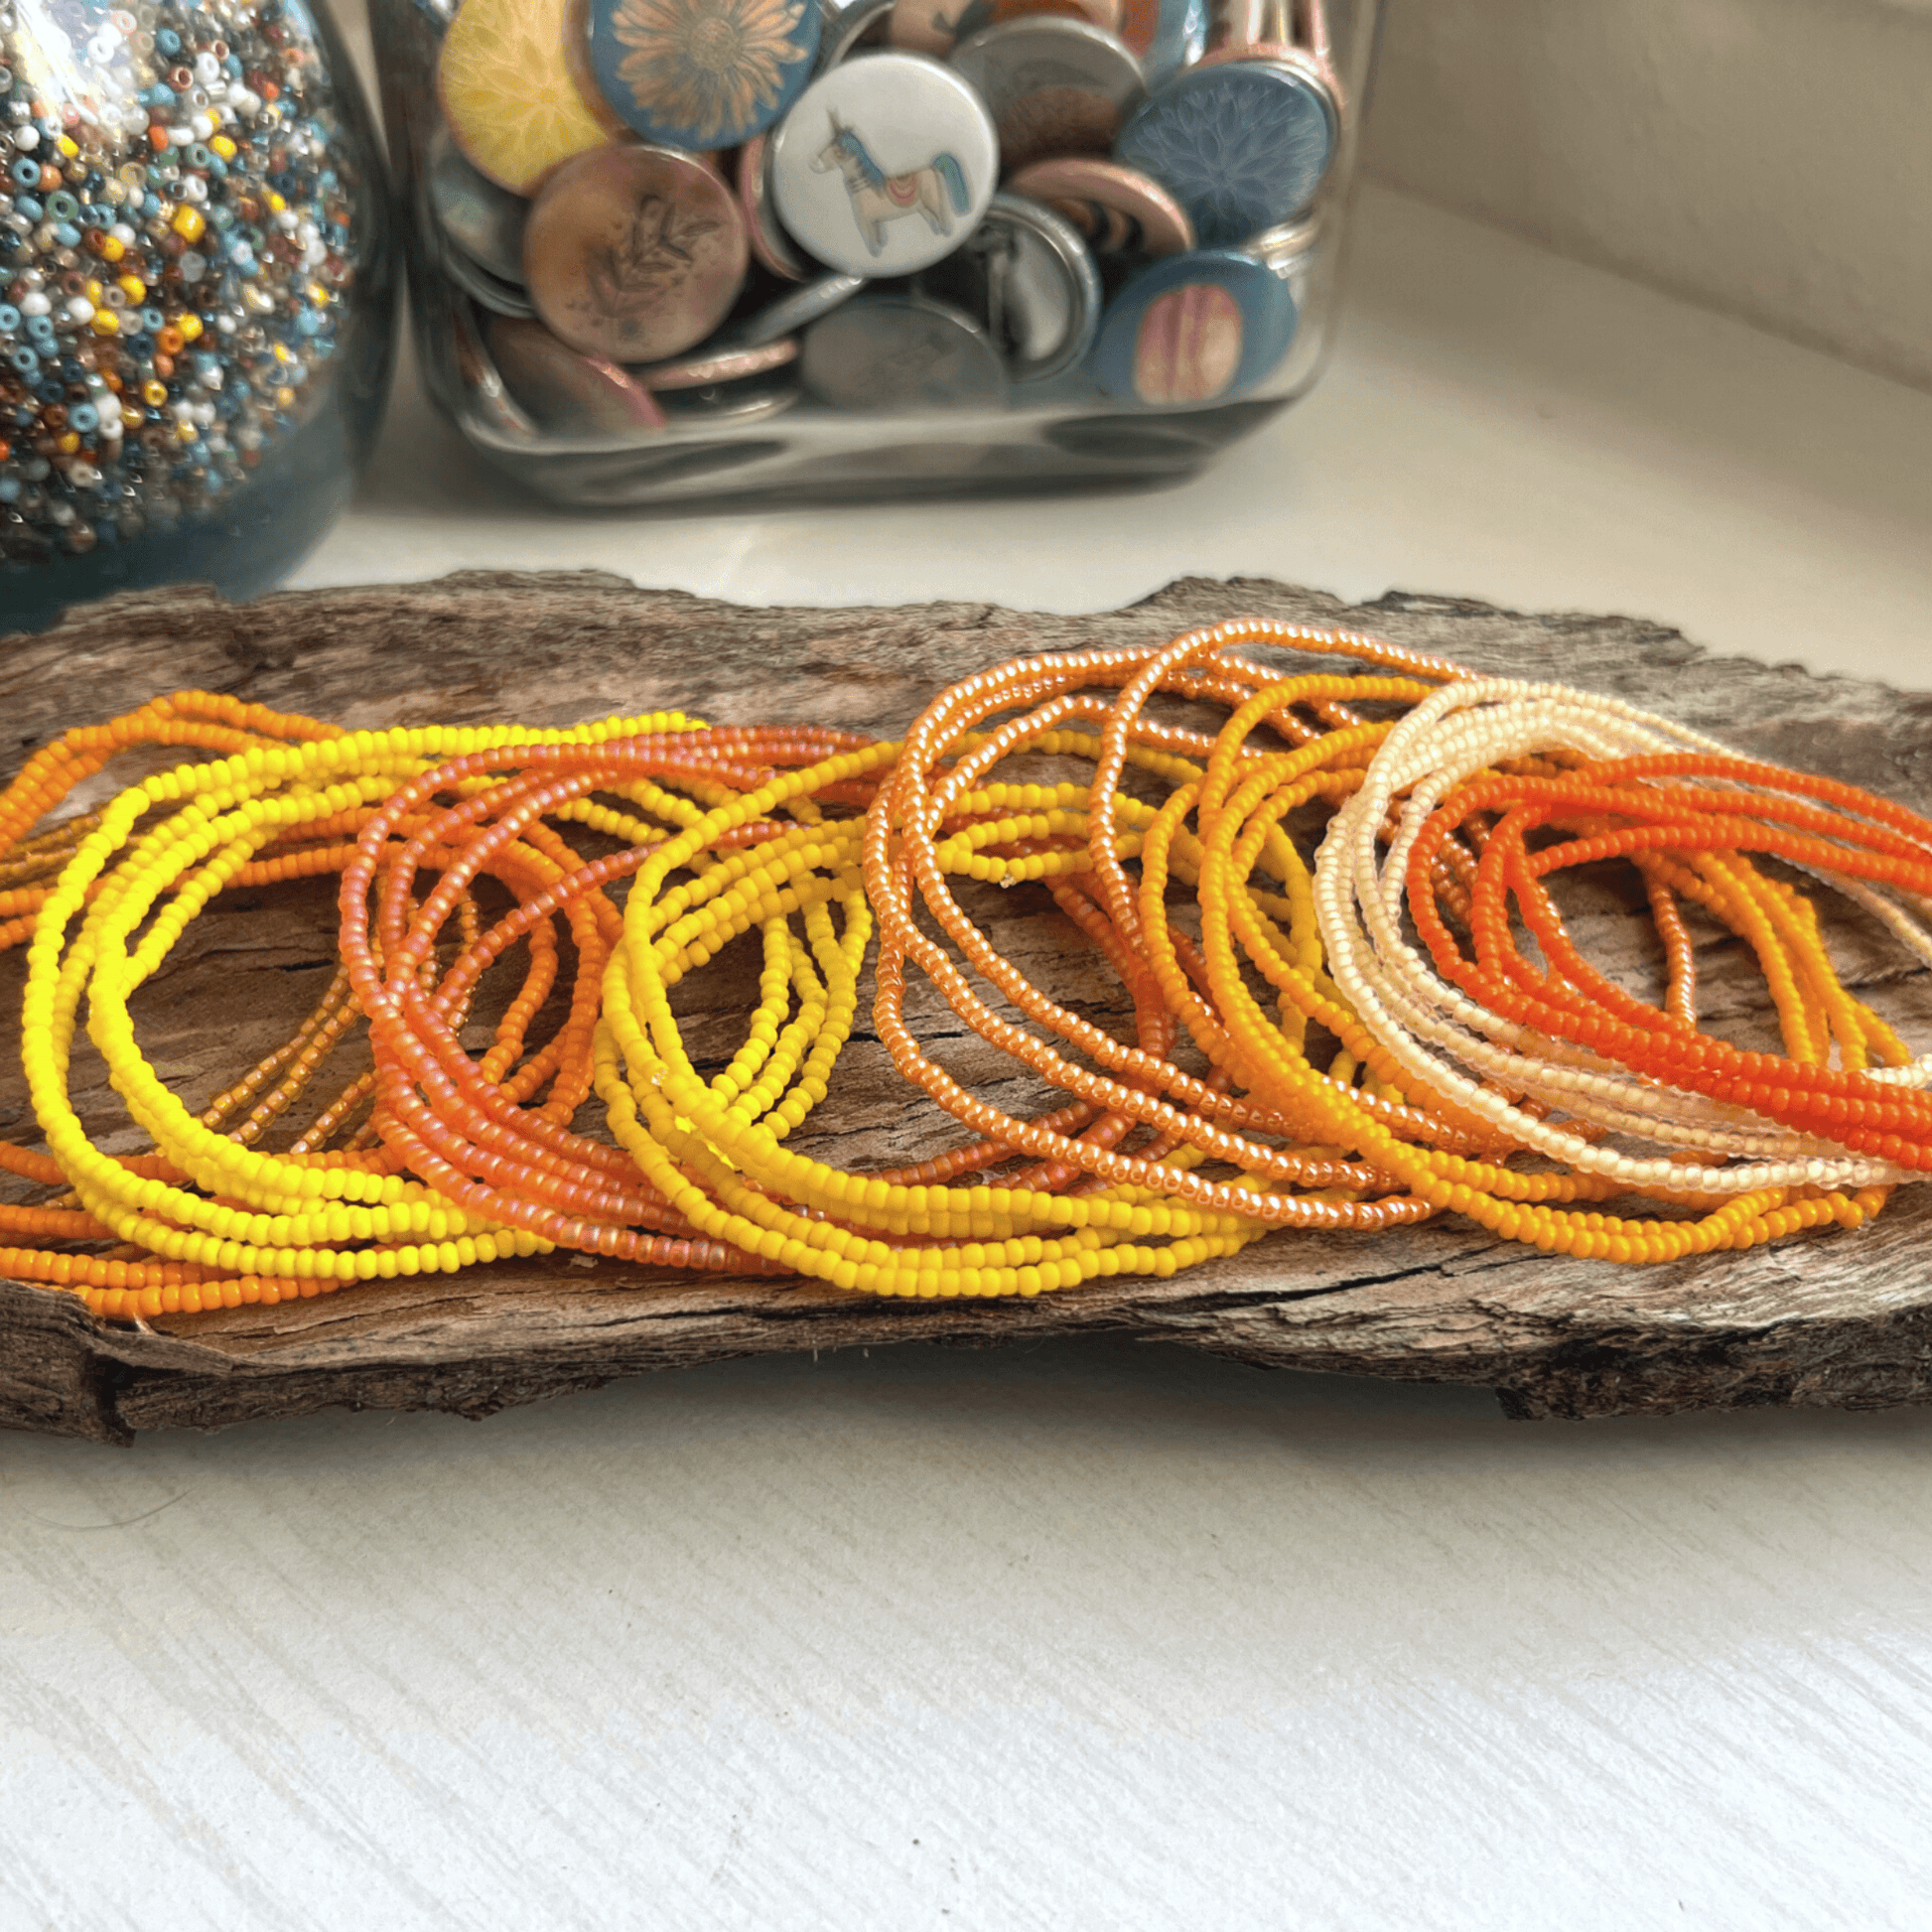 Yellow & Orange Collection Seed Bead Stretch Bracelets - Stones + Paper